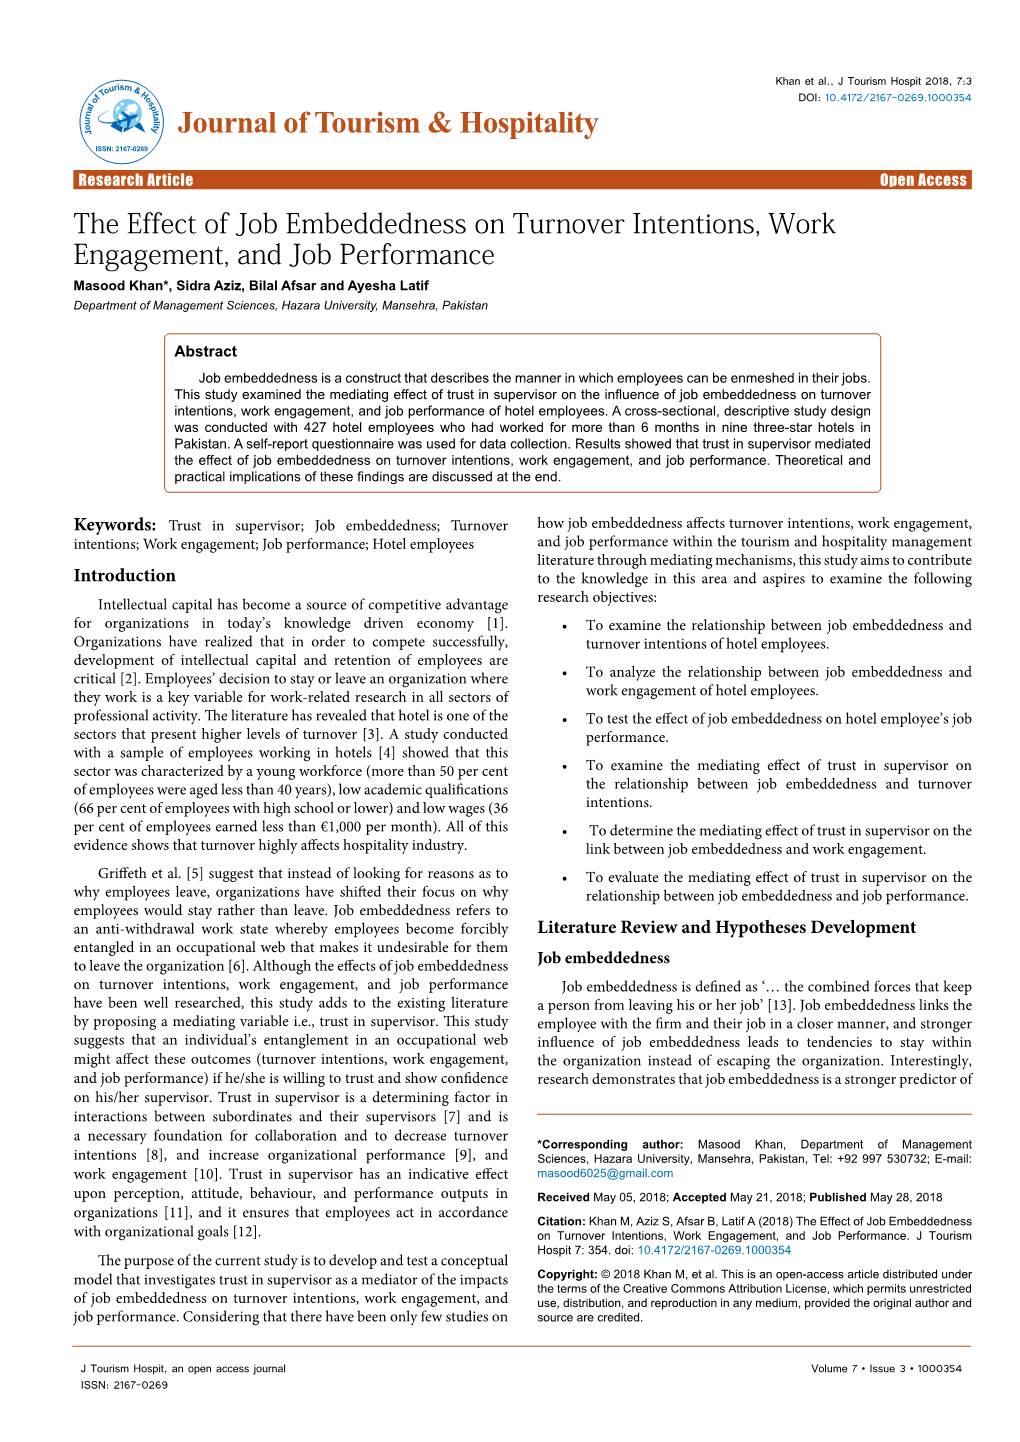 The Effect of Job Embeddedness on Turnover Intentions, Work